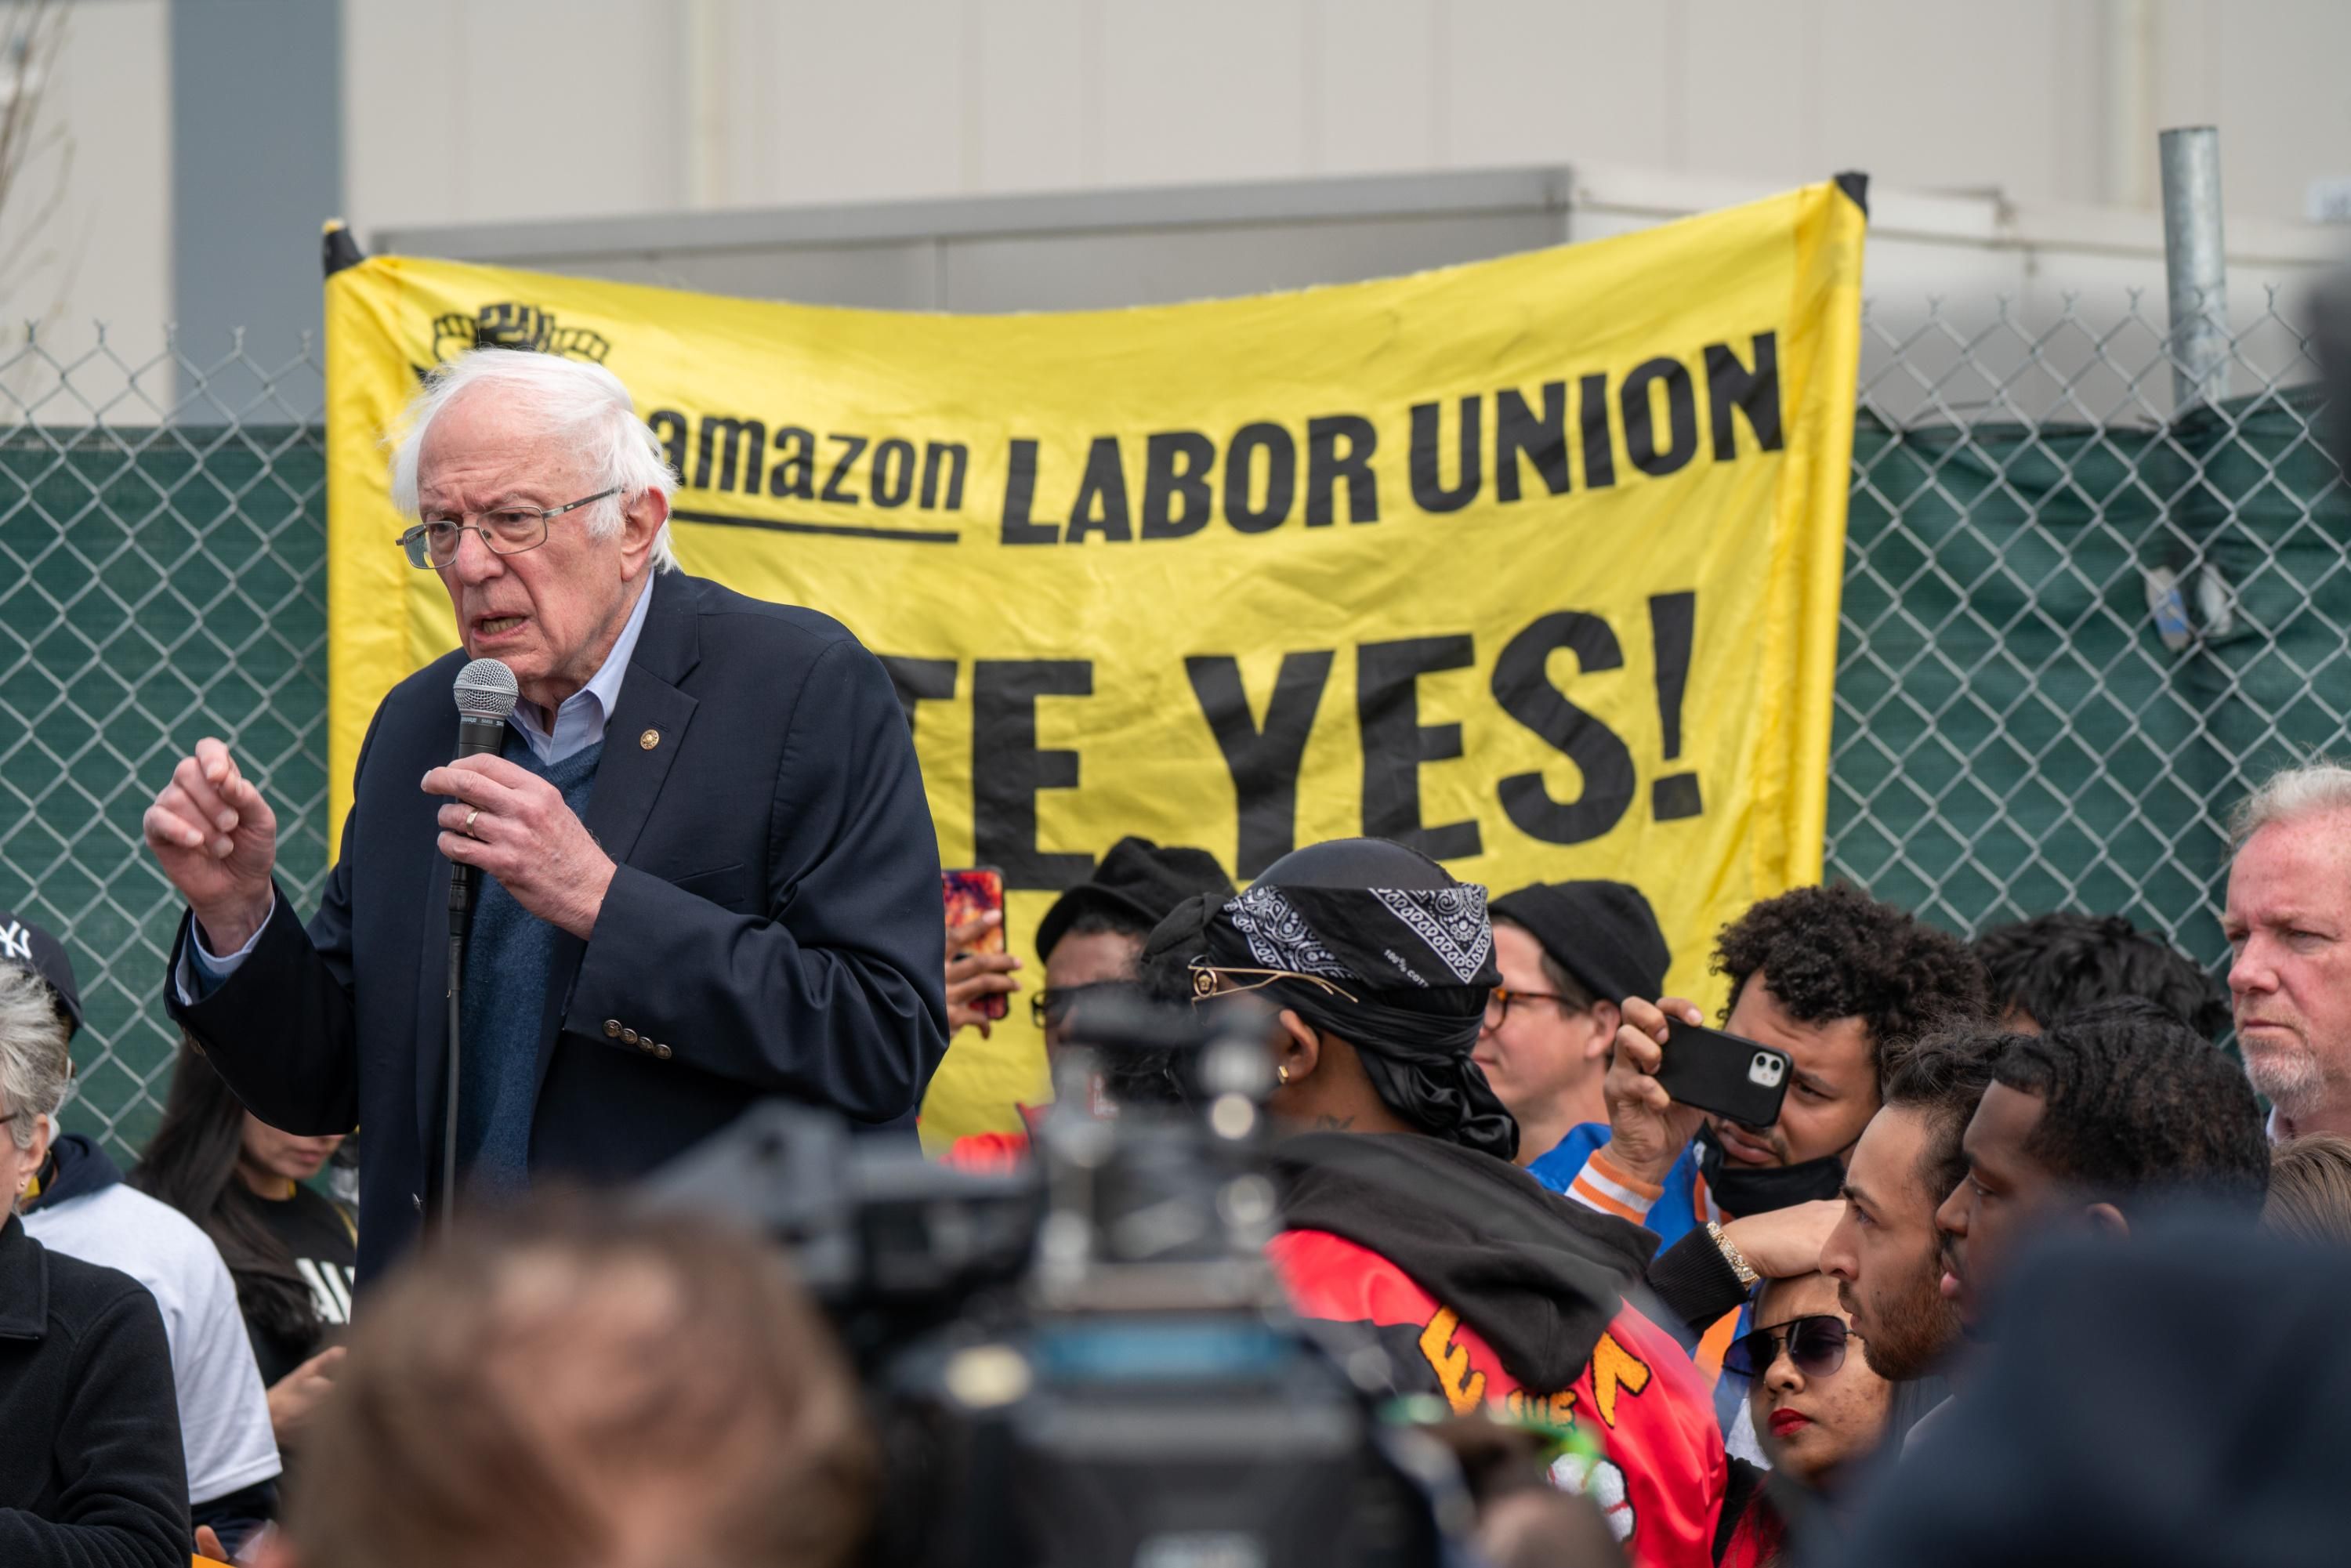 Sanders Says ‘No Corporation That Breaks the Law Should Get a Federal Contract’